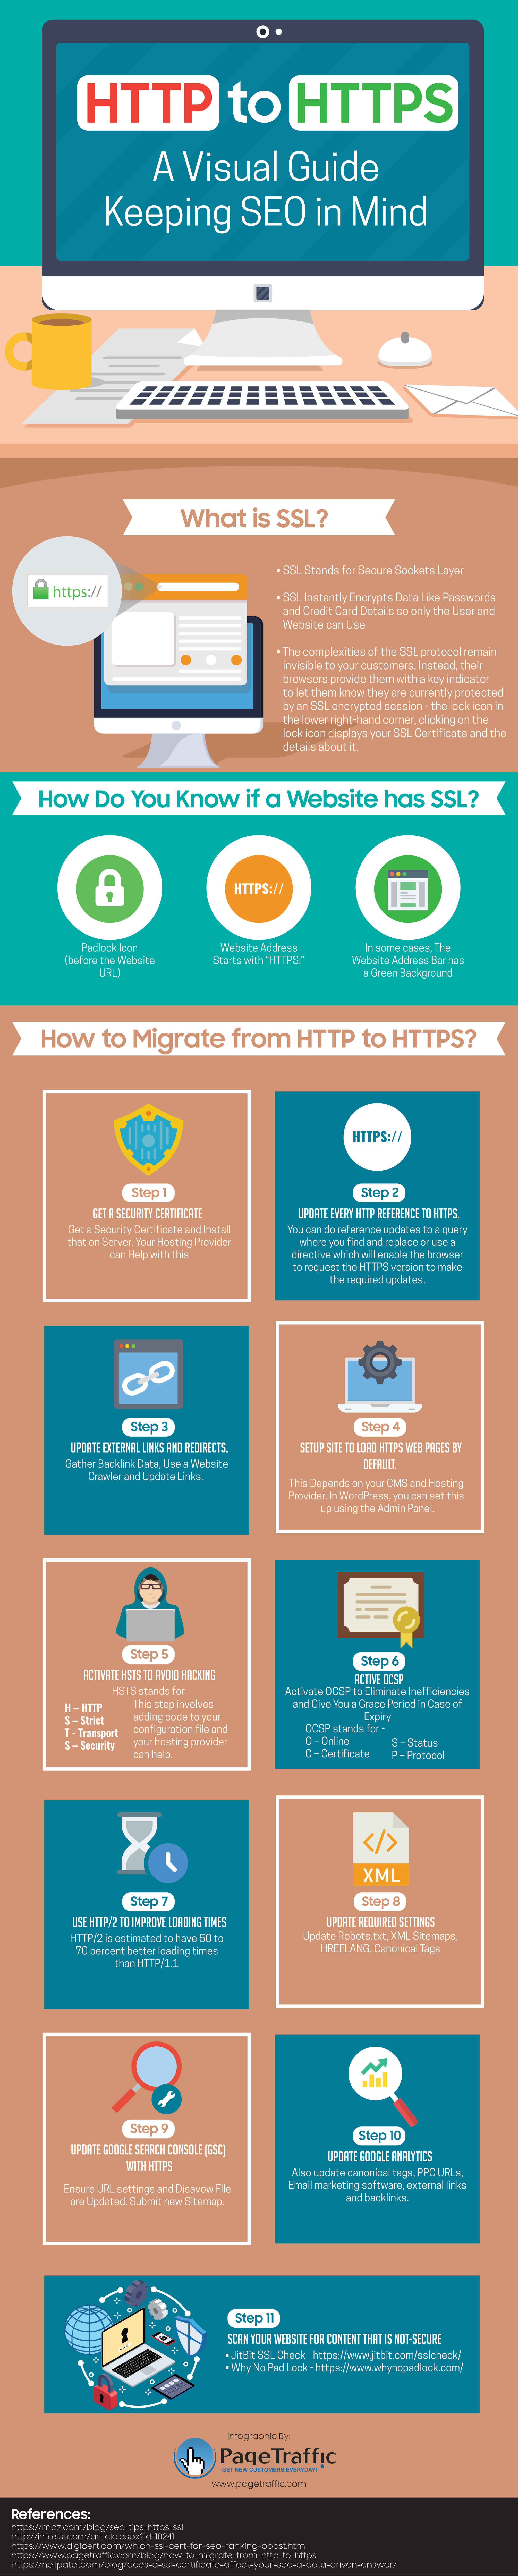 HTTP-to-HTTPS-Visual-Guide-image